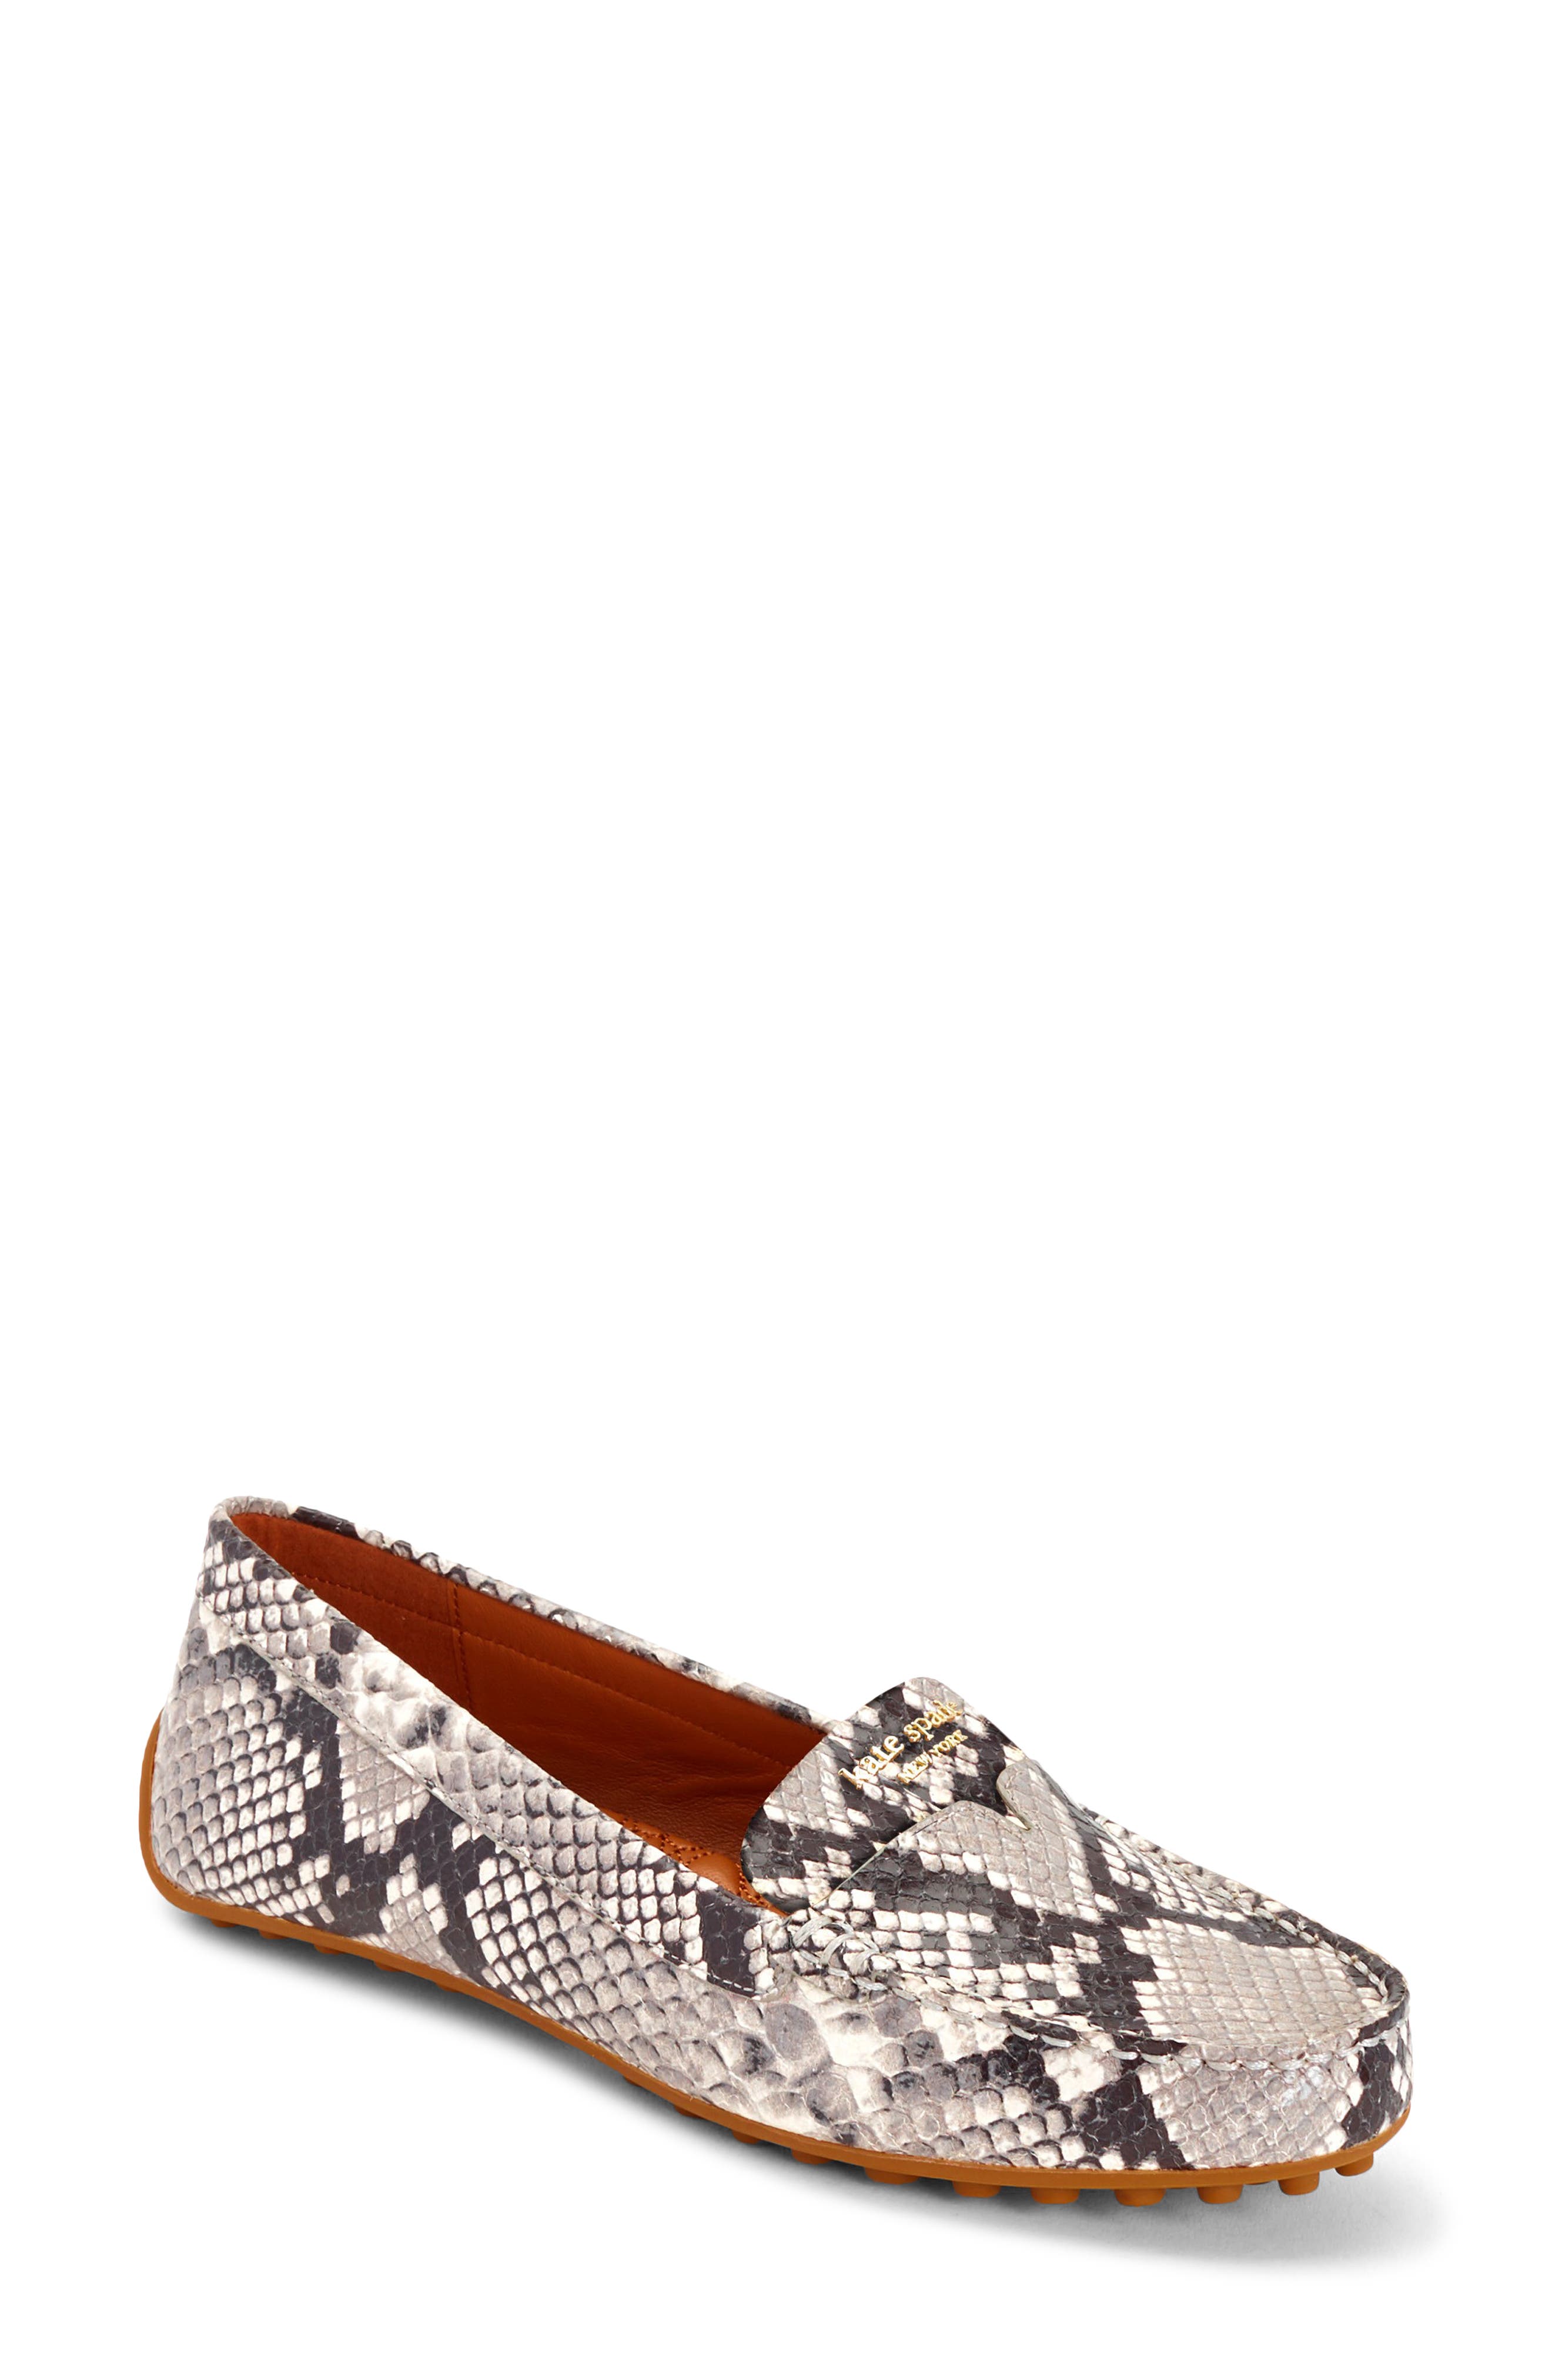 Women's kate spade new york Shoes 